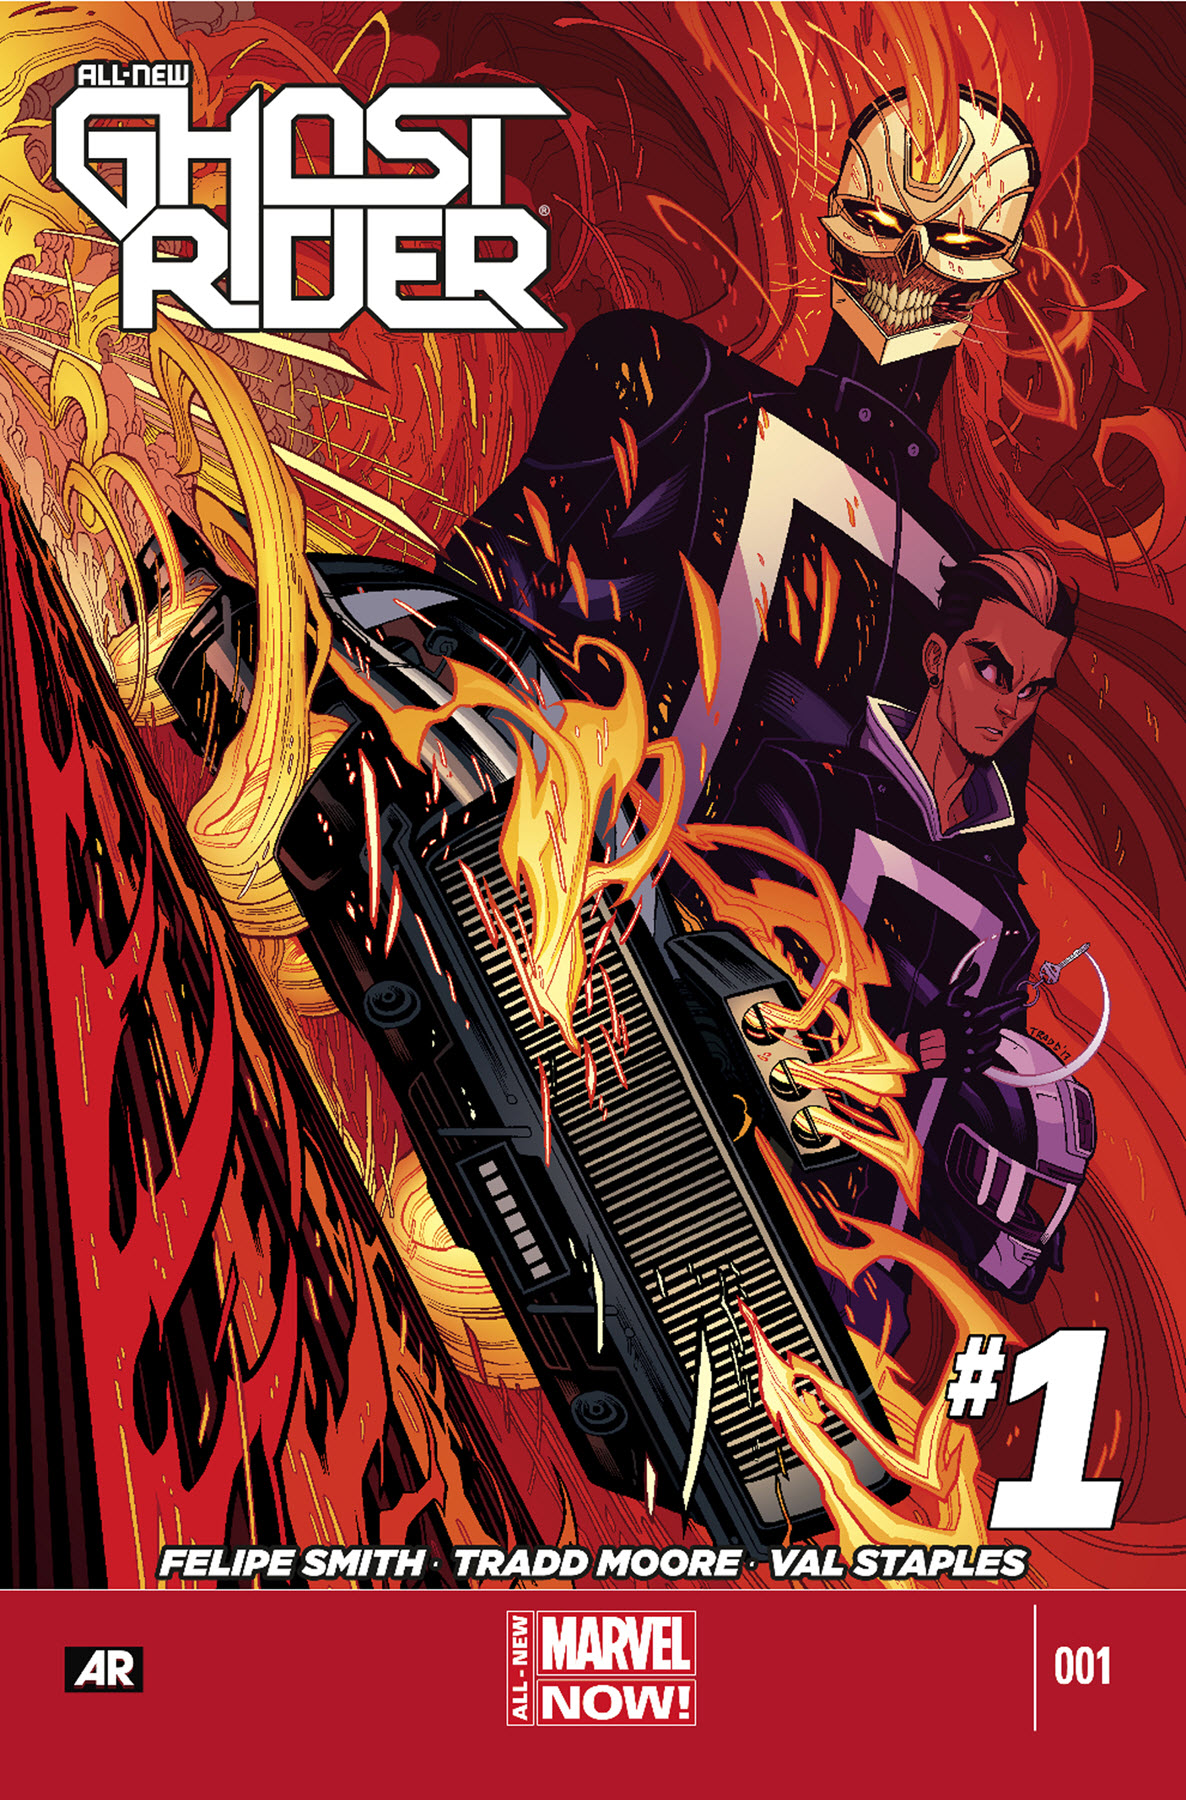 Marvel Comic character Ghostrider